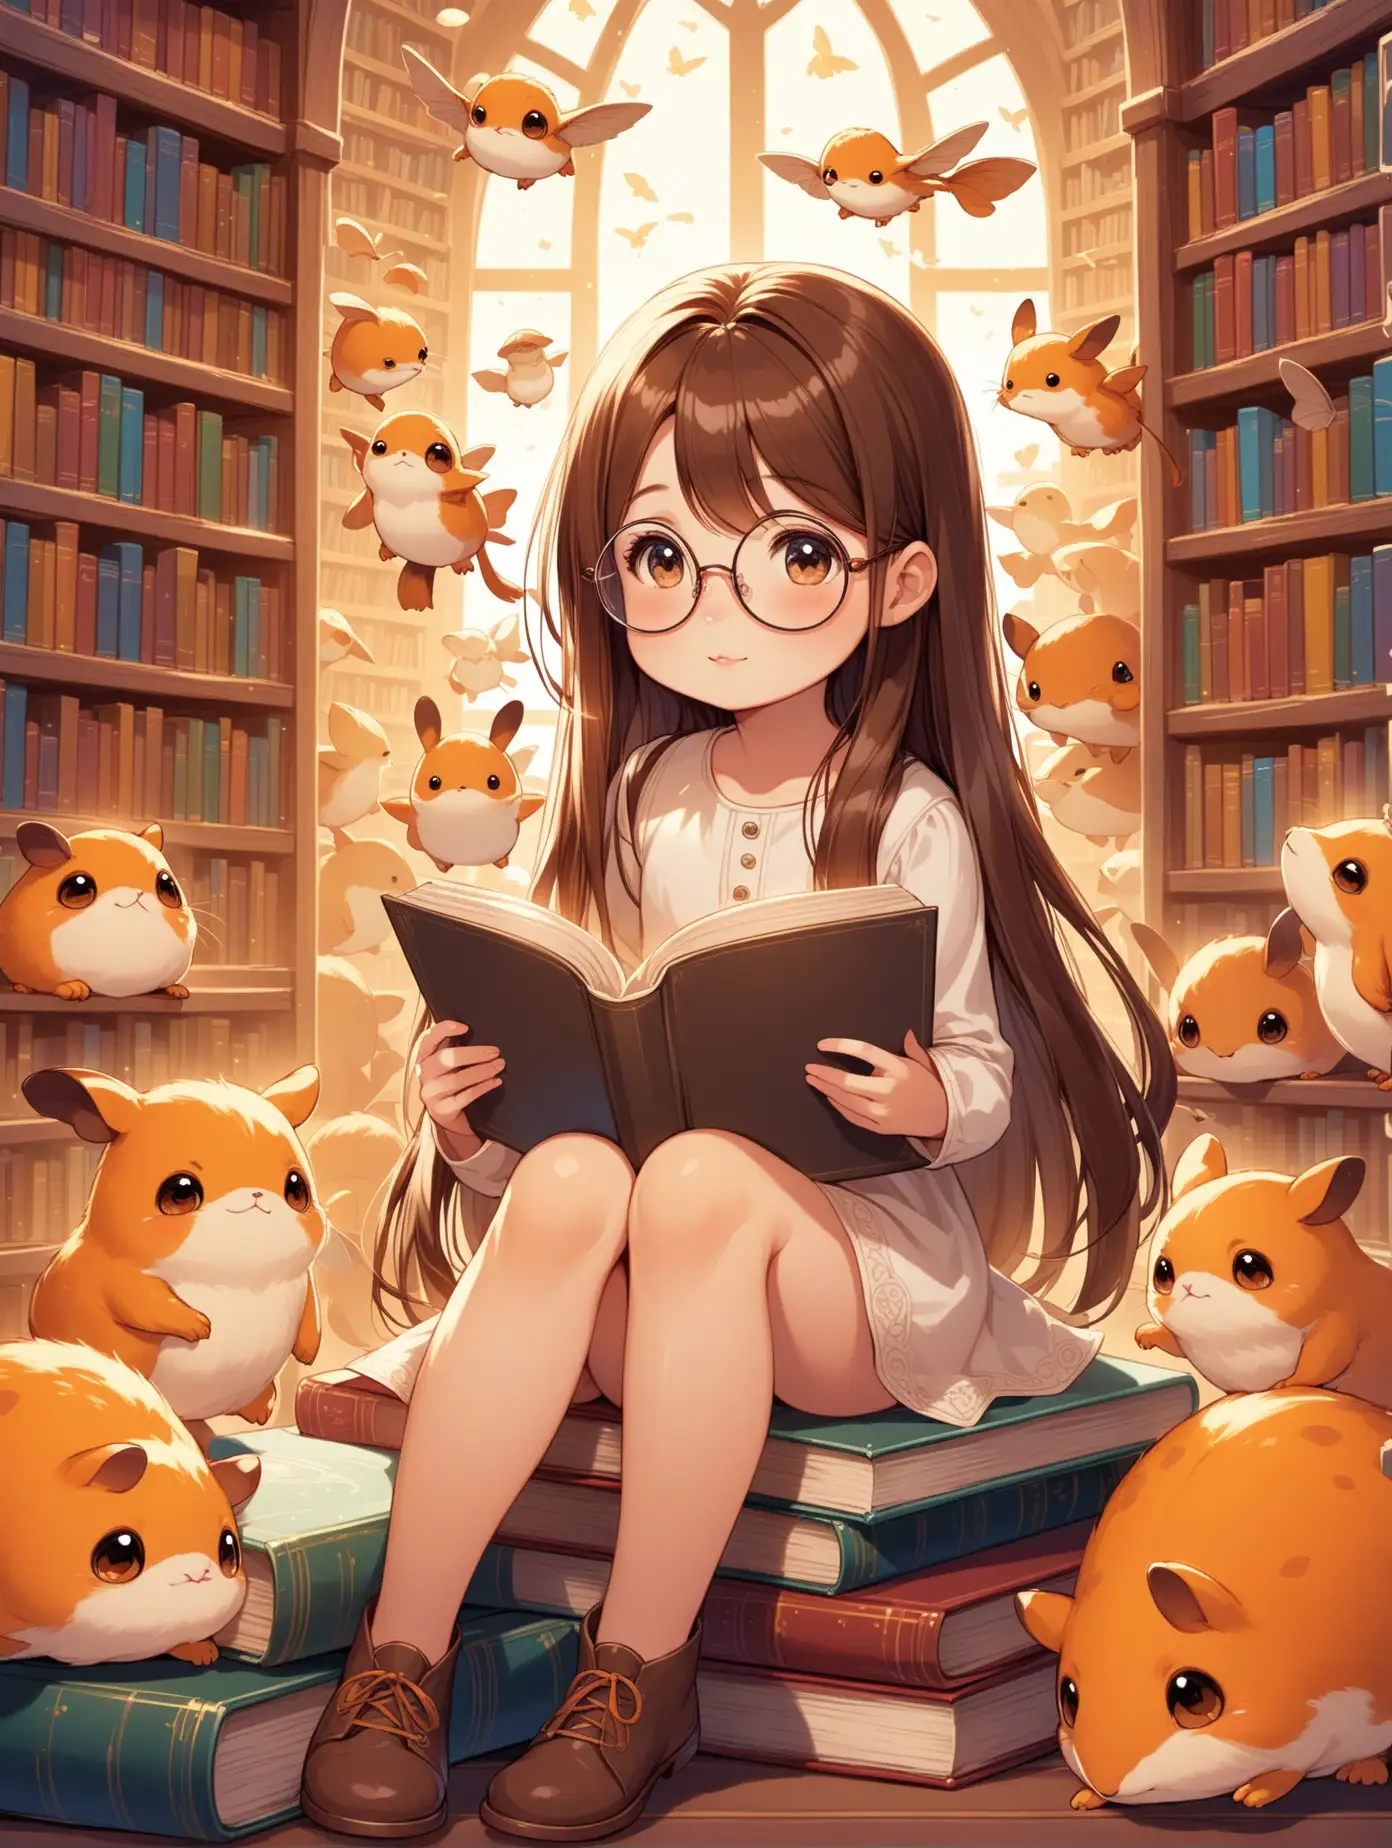 a cute little cartoon girl wearing big round glasses, brown long straight hair, surrounded by little creatures, reading a book, and sitting on different books in a fantasy library